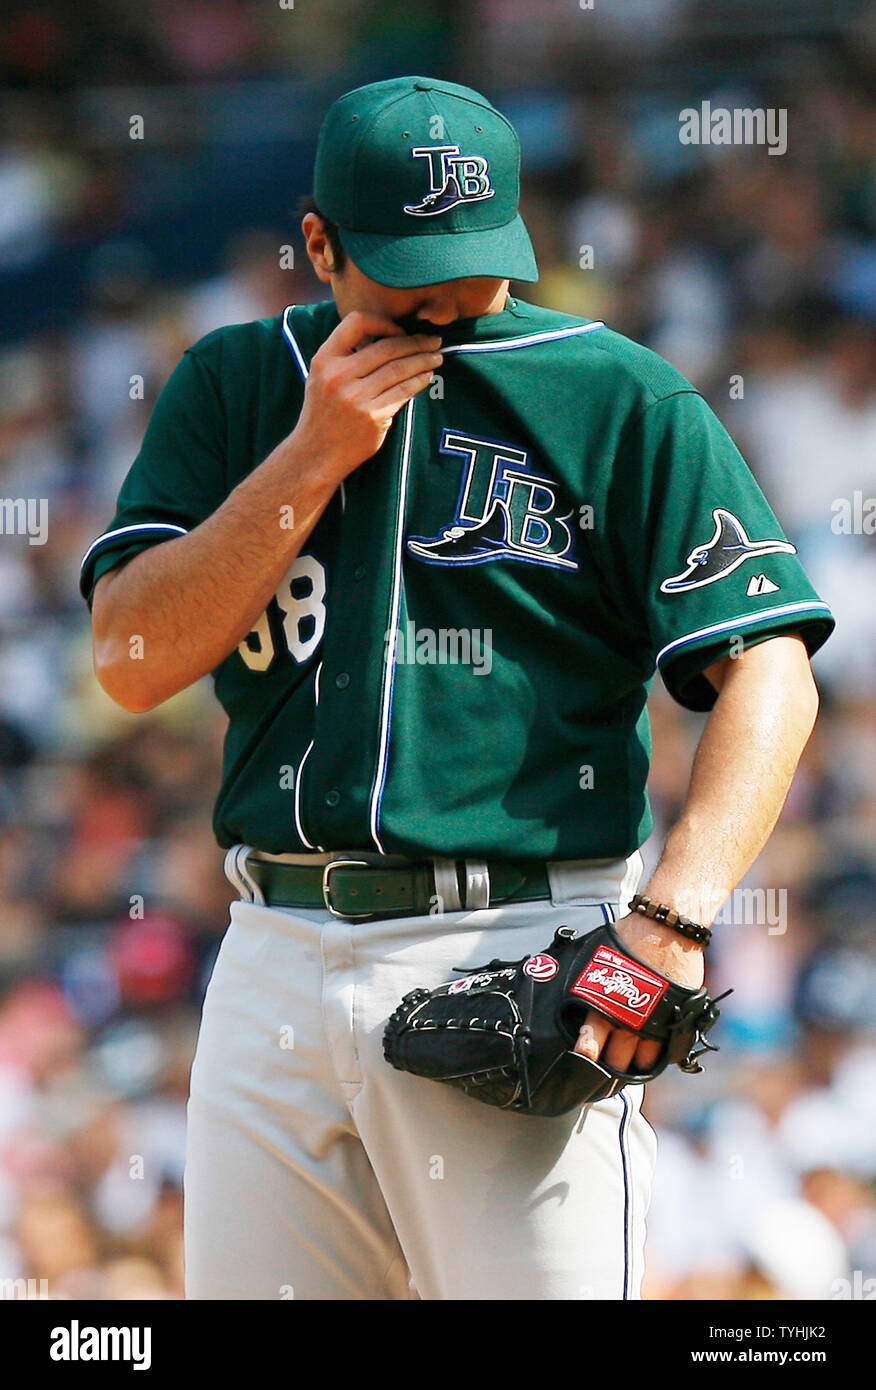 Tampa Bay Devil Rays Jae Seo wipes his face on his shirt in the first  inning at Yankees Stadium in New York City on July 29, 2006. The Tampa Bay  Devil Rays